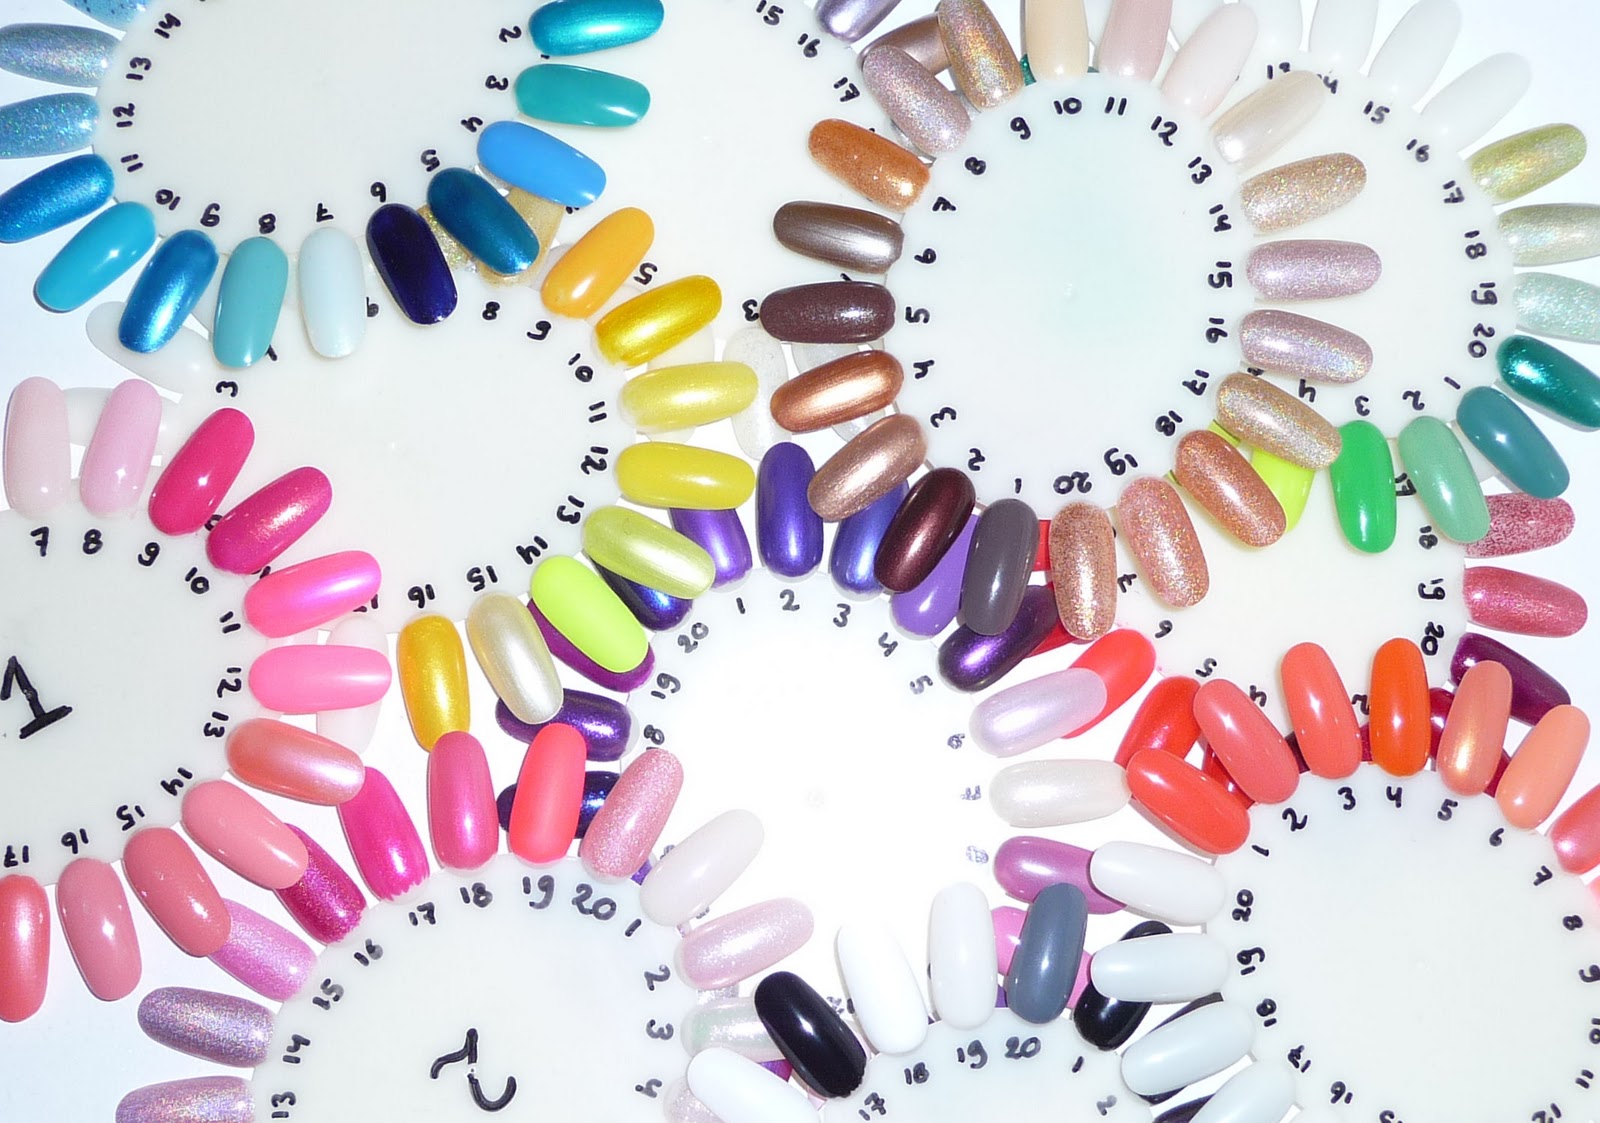 4. Top 10 Color Wheels for Nail Polish Lovers - wide 4